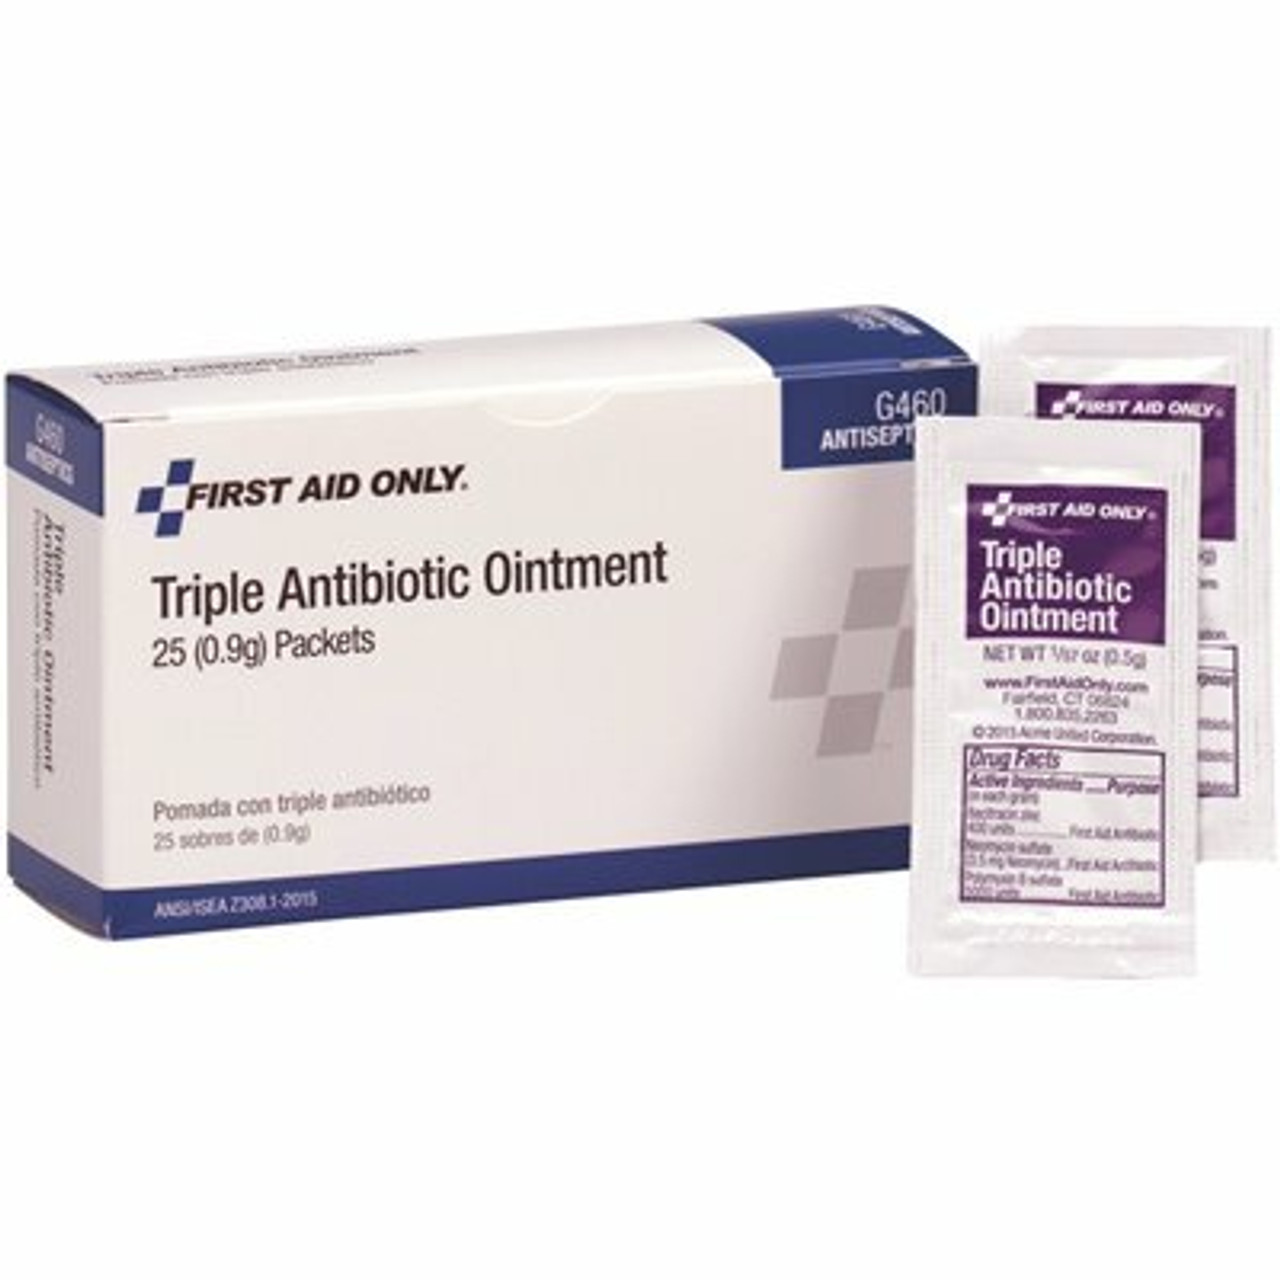 First Aid Only 0.5 G Triple Antibiotic Ointment Packets (25 Per Box)